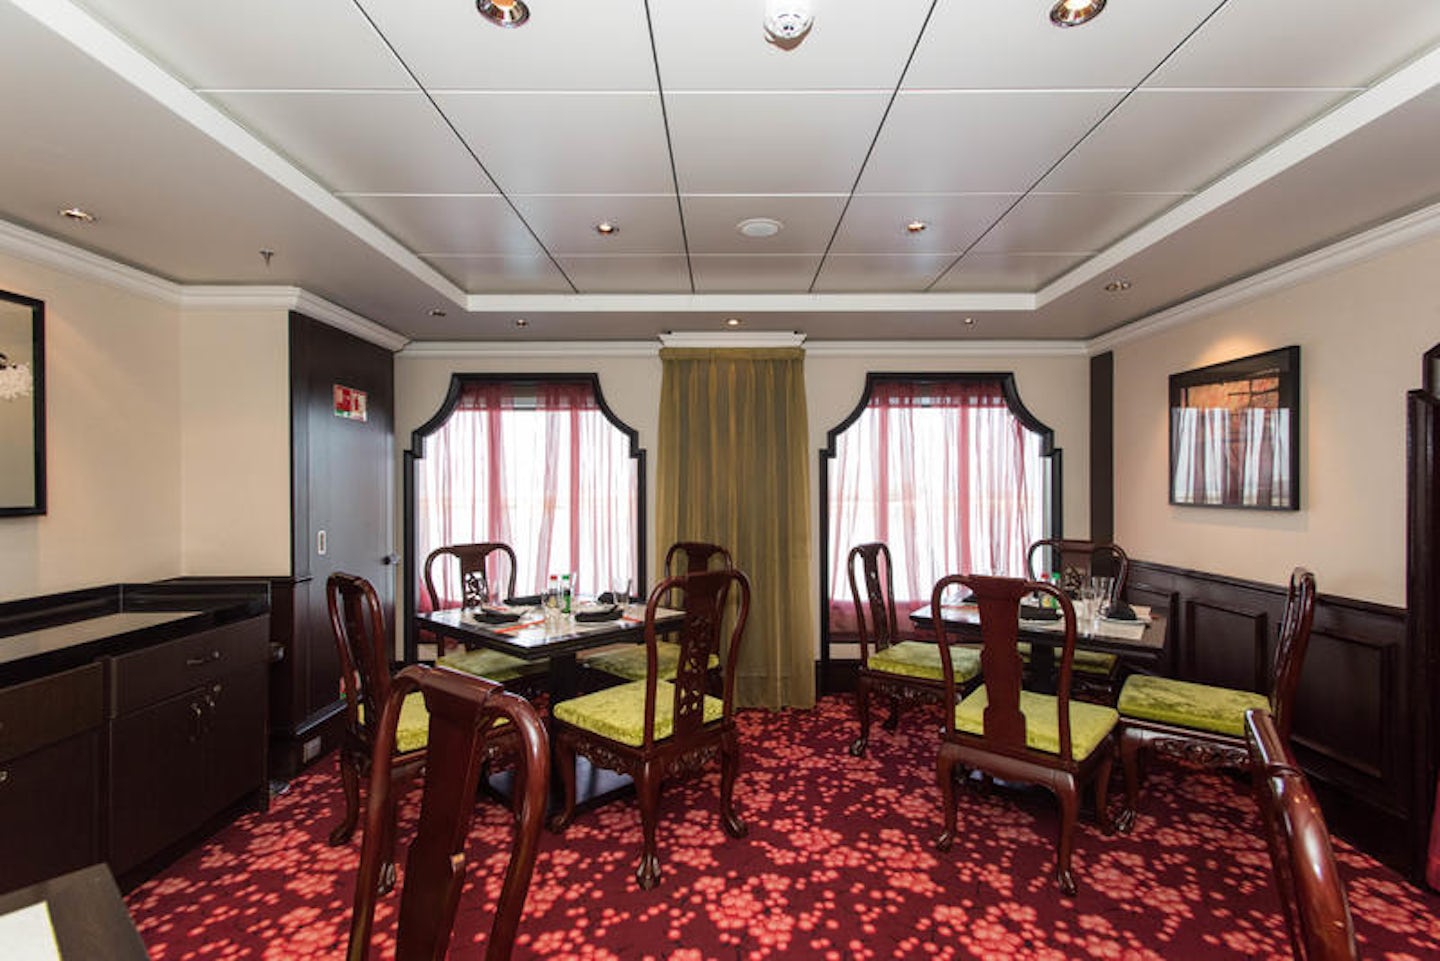 Shanghai's Chinese Restaurant and Noodle Bar on Norwegian Epic